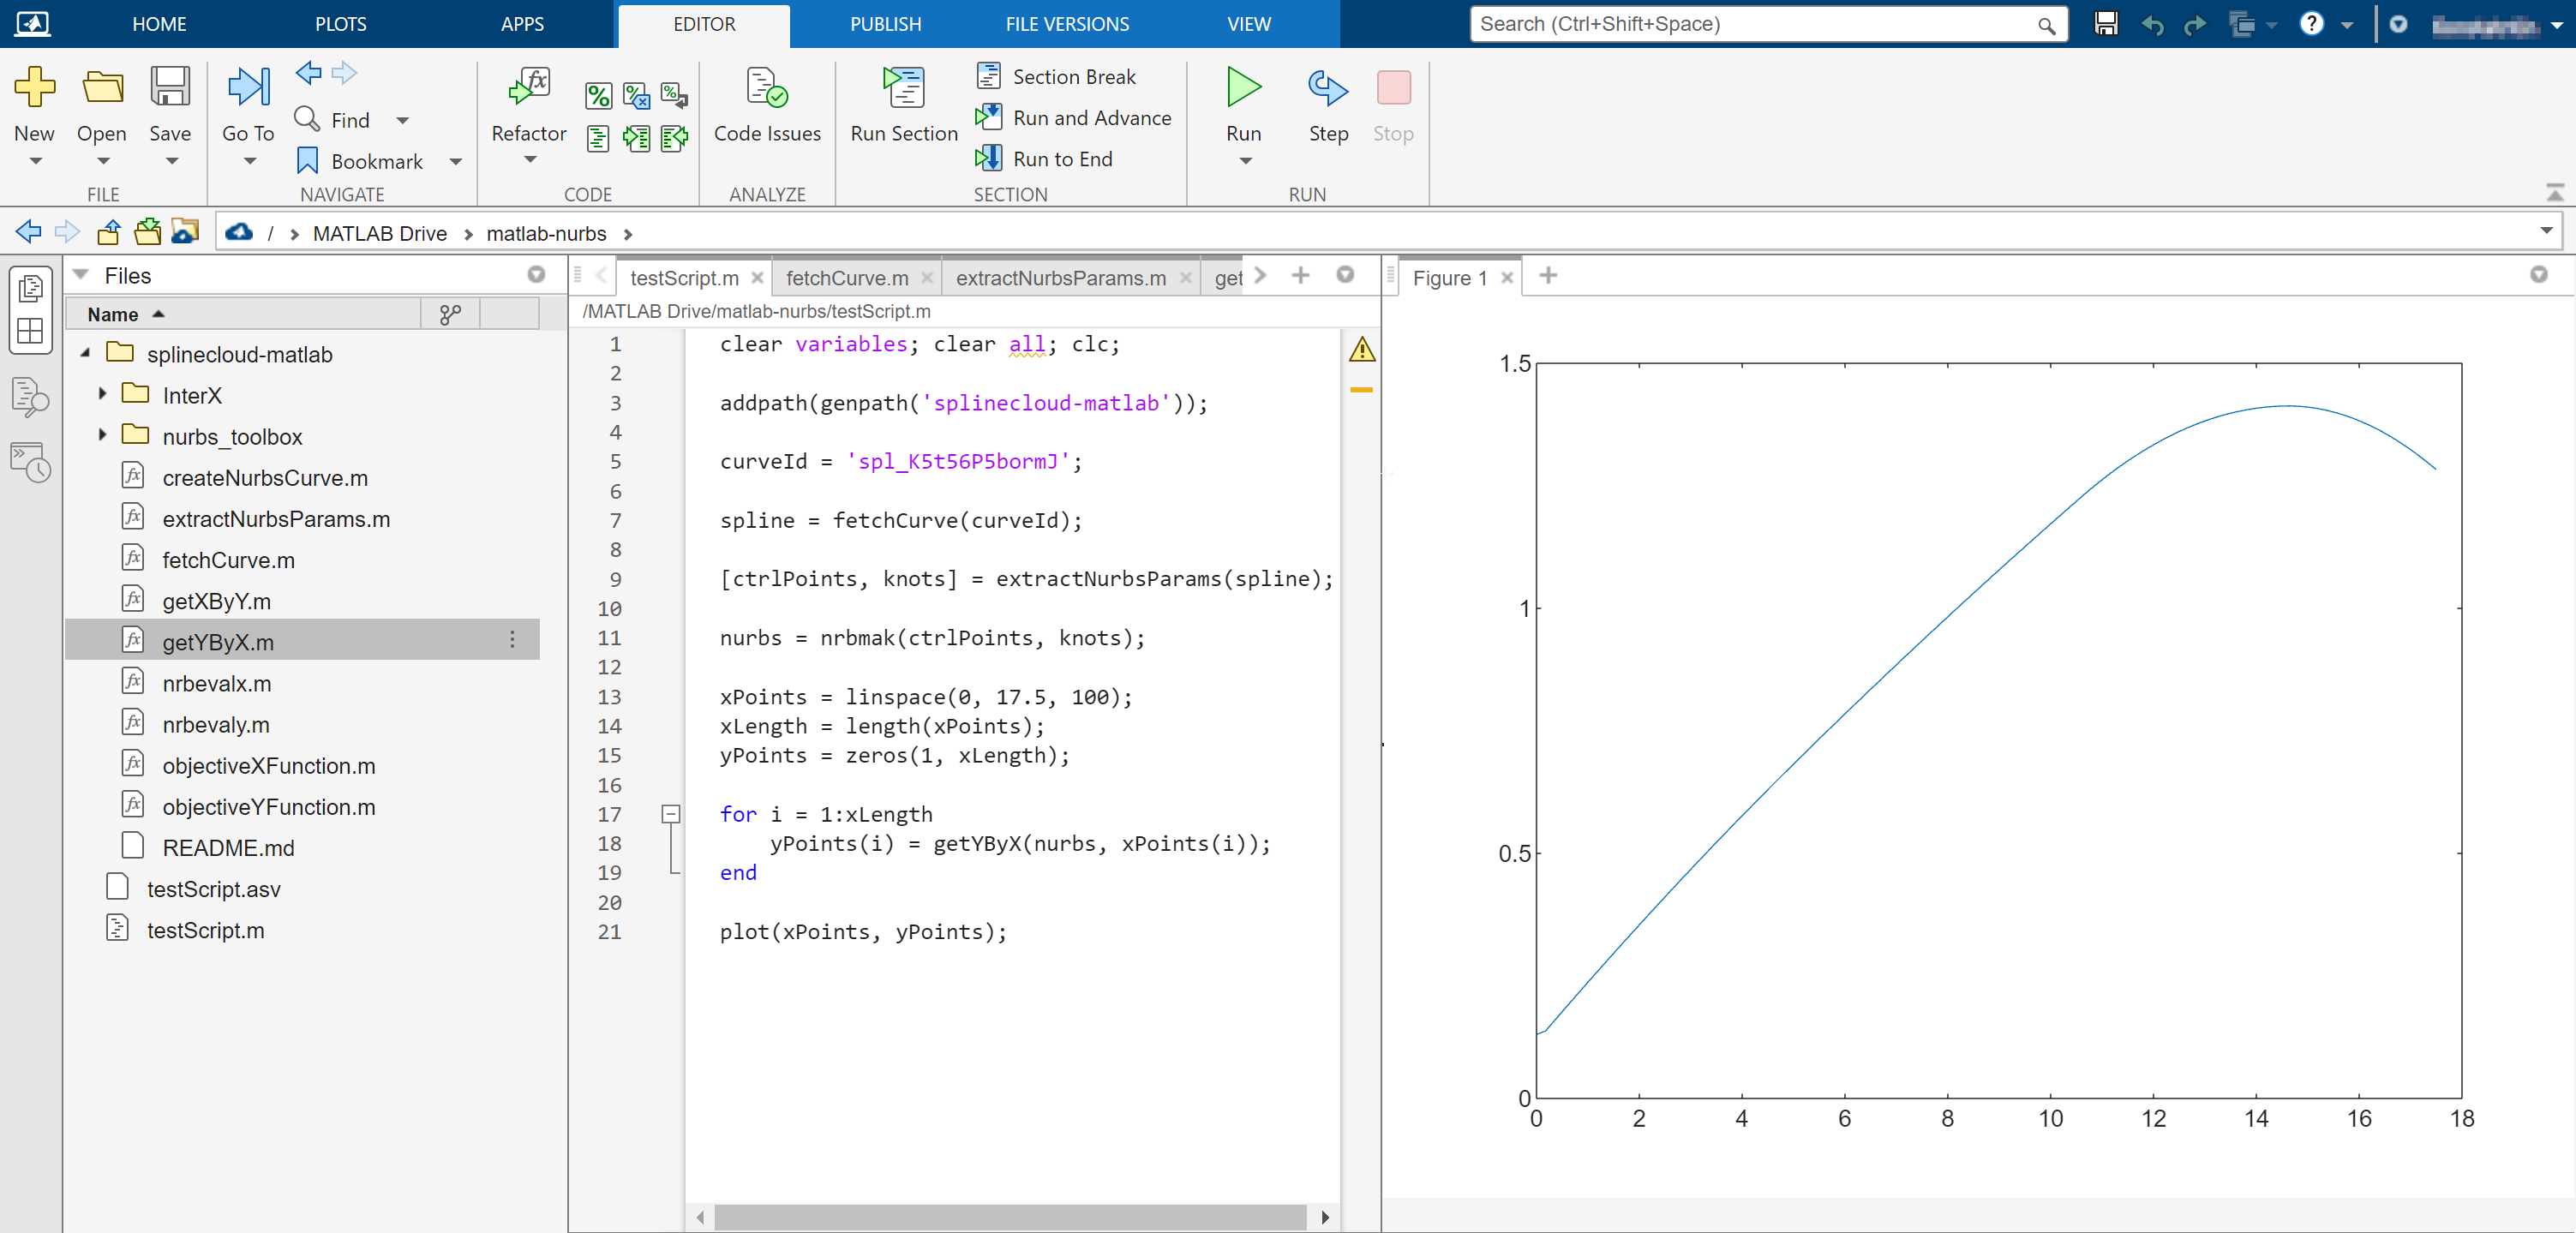 Curve loaded into MATLAB